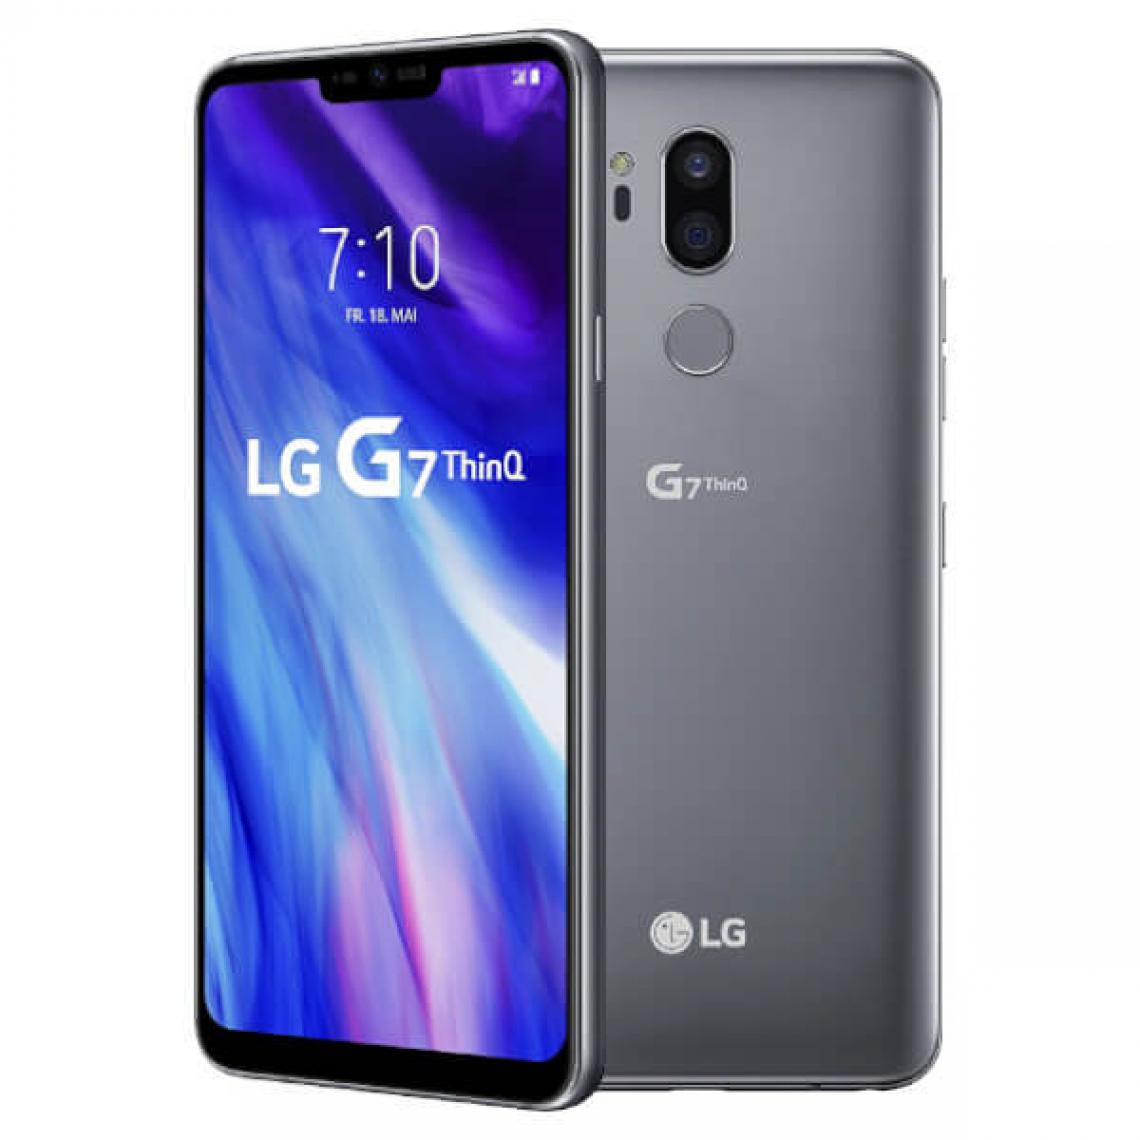 LG - LG G7 ThinQ 4Go / 64Go Argent - Smartphone Android